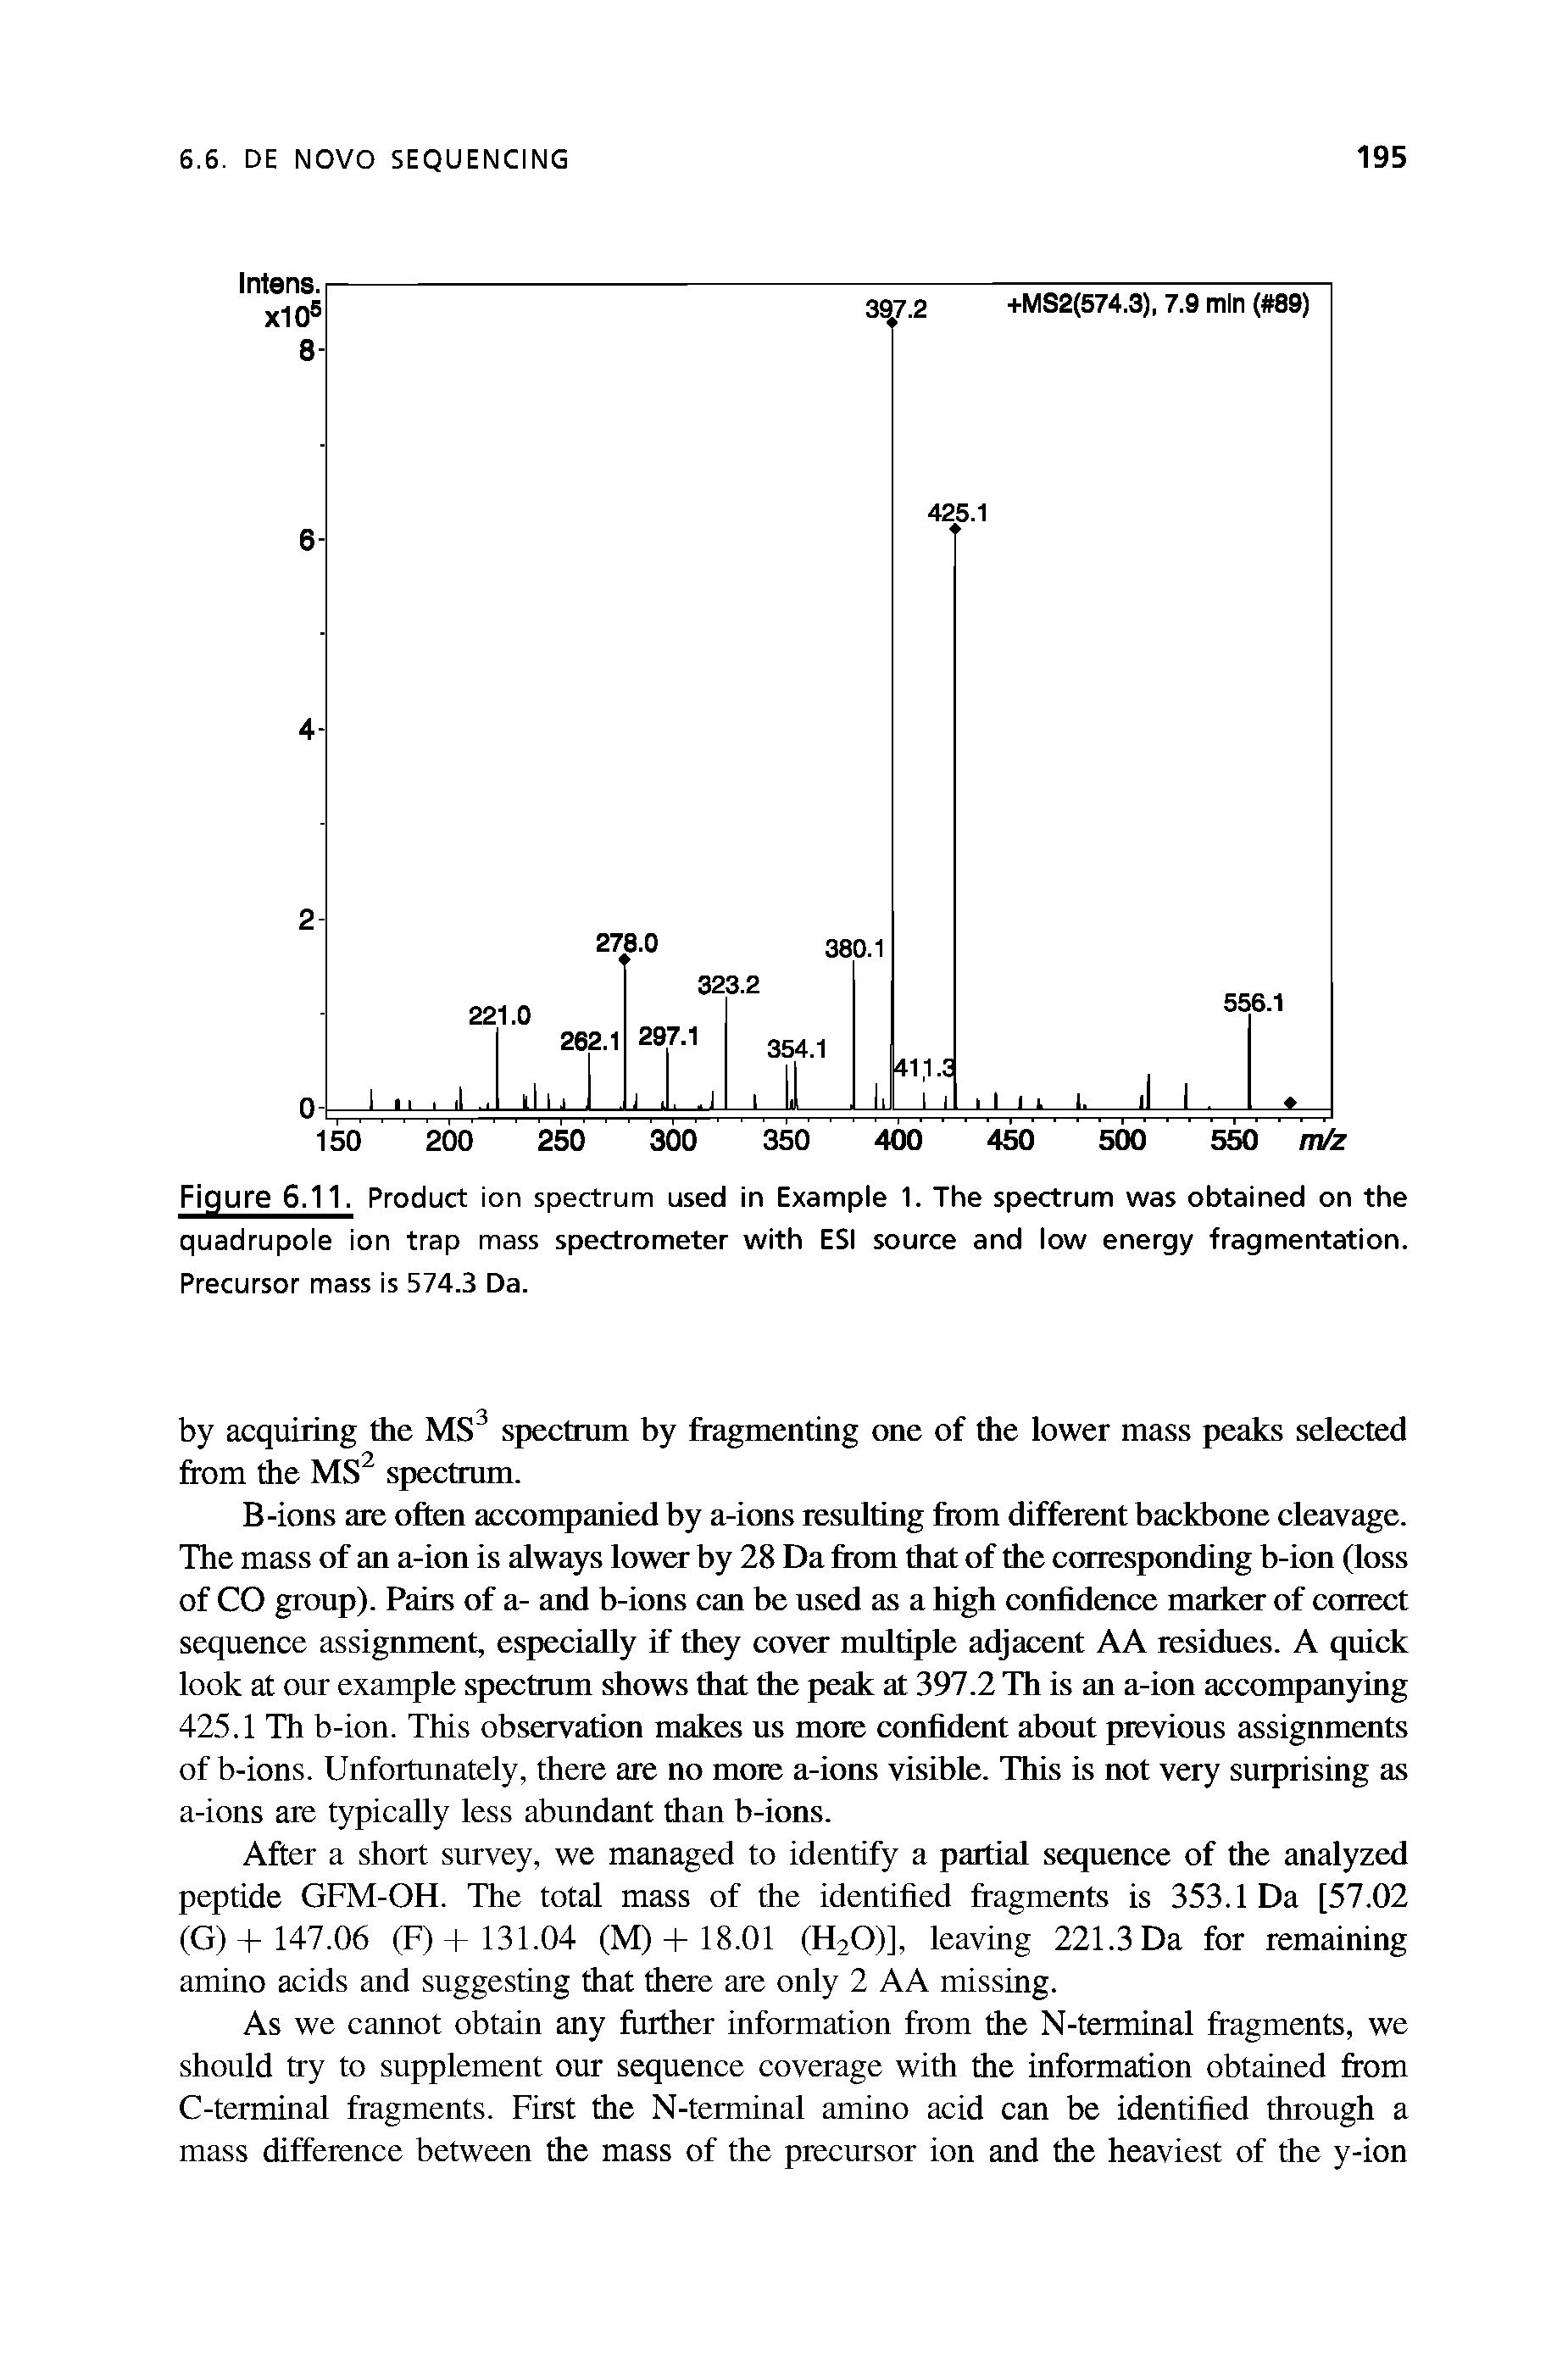 Figure 6.11. Product ion spectrum used in Example 1. The spectrum was obtained on the quadrupole ion trap mass spectrometer with ESI source and low energy fragmentation. Precursor mass is 574.3 Da.